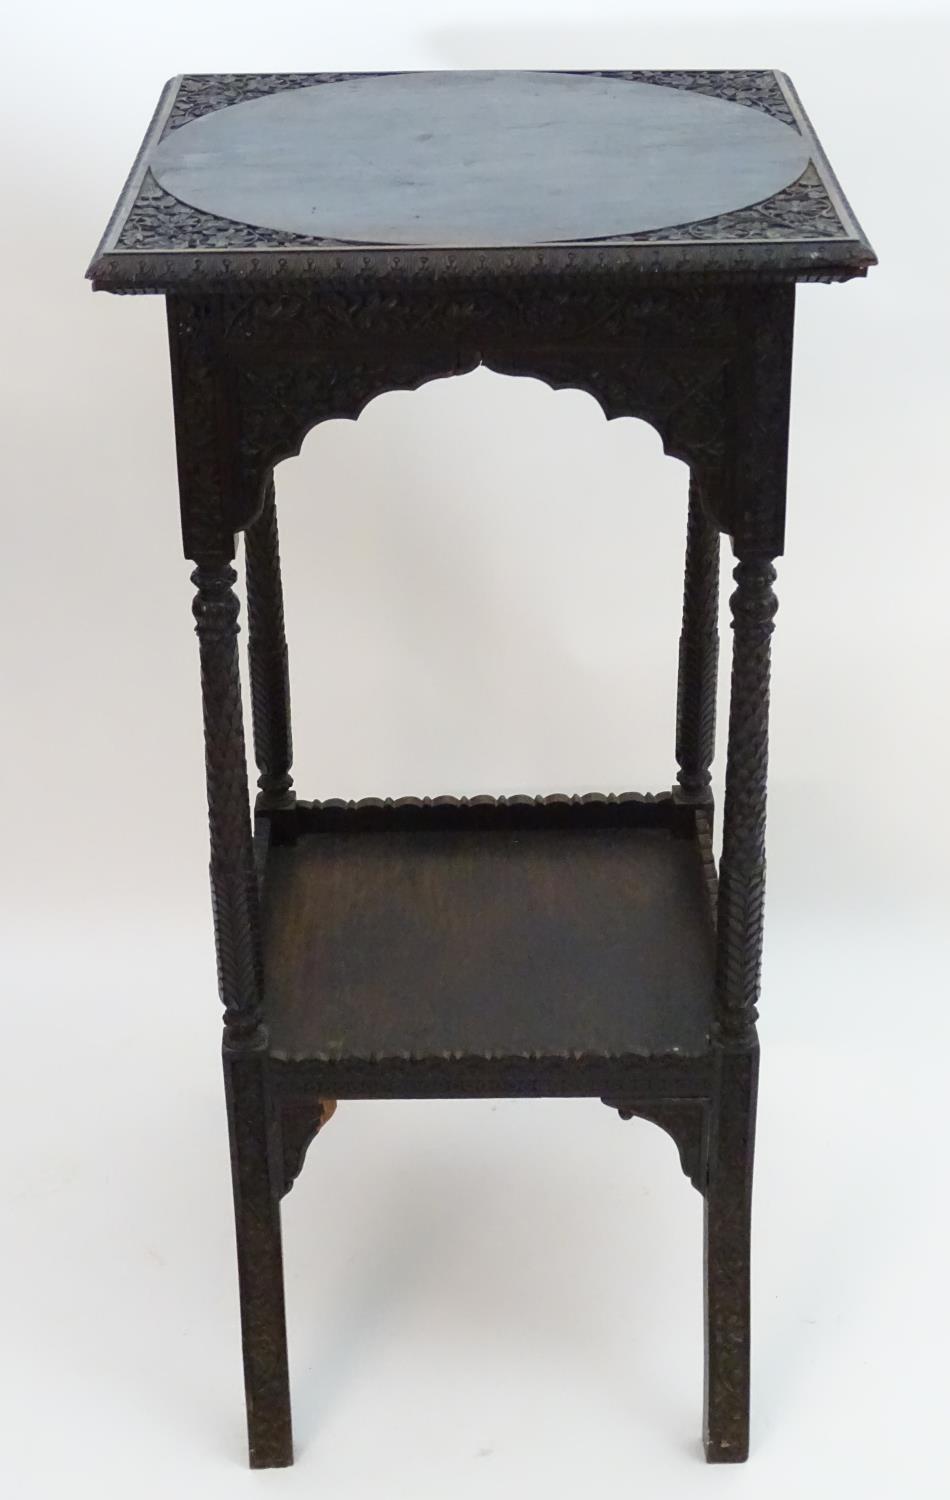 A 19thC rosewood mirror with a pierced and carved top and bottom, depicting anthemion in flower - Image 5 of 8